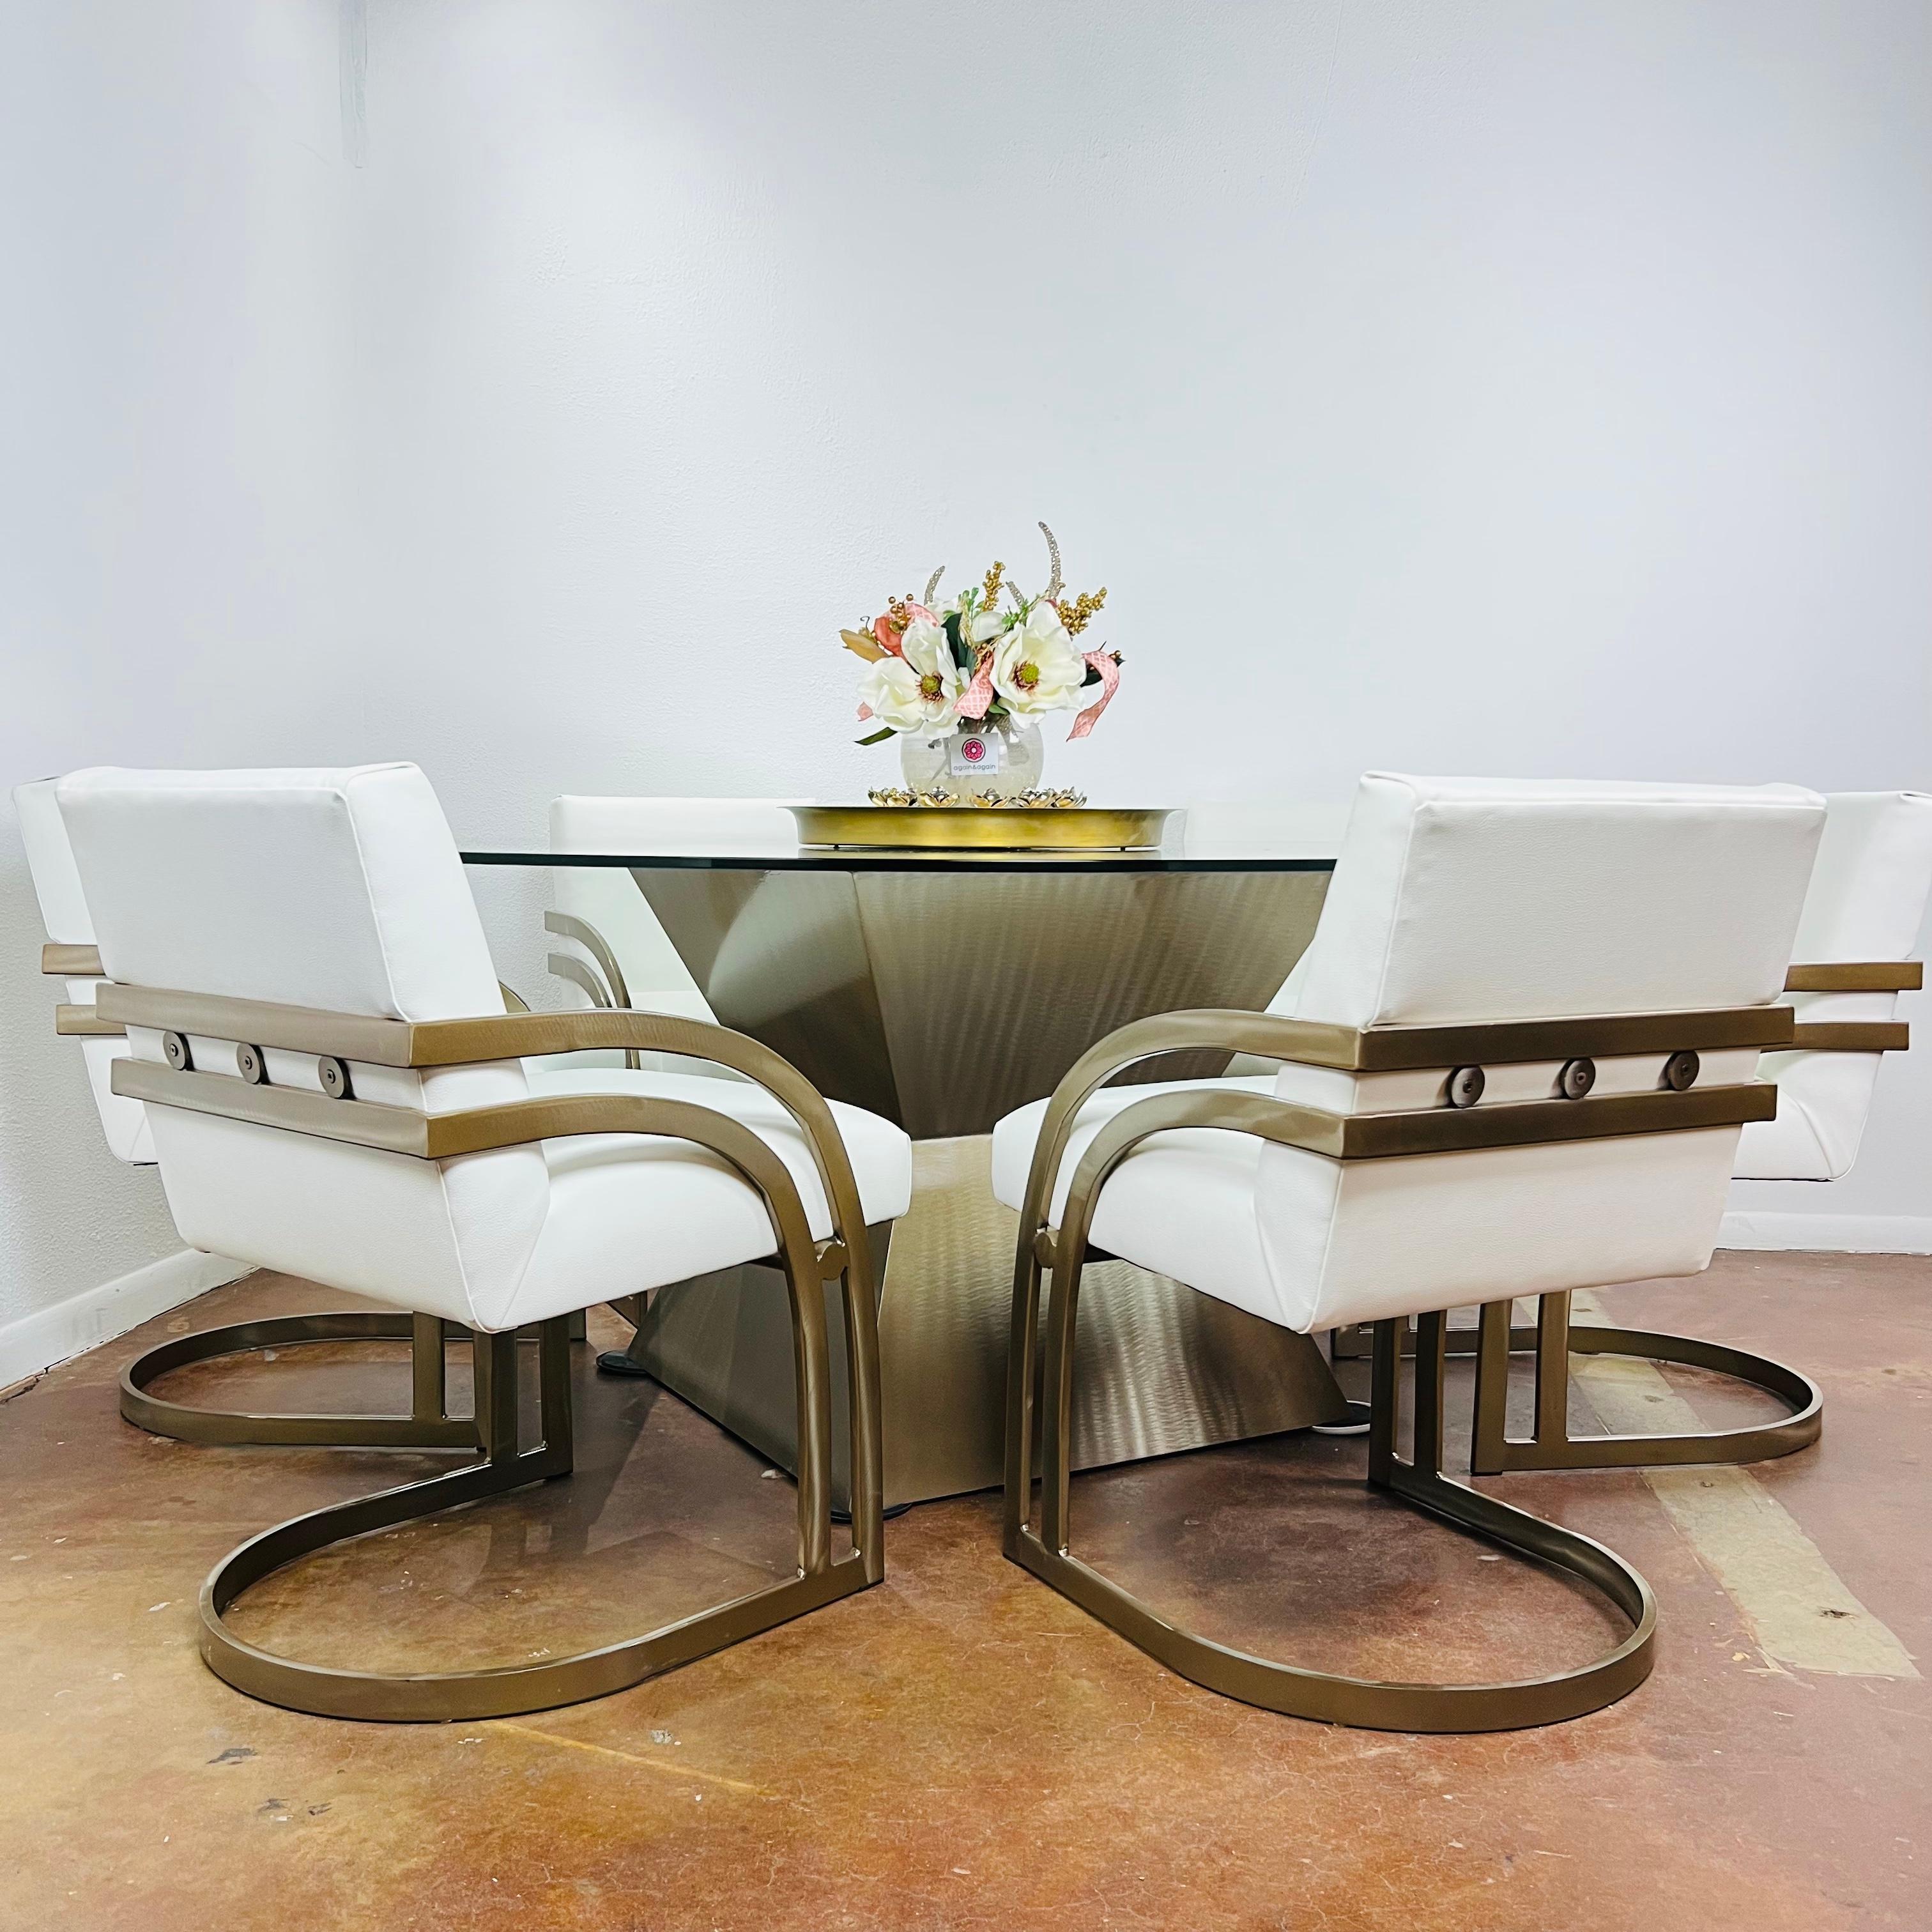 Set of 6 contemporary cantilever dining chairs with antique bronze finish and white vinyl seats. In the Style of Milo Baughman. Very good, lightly used condition.